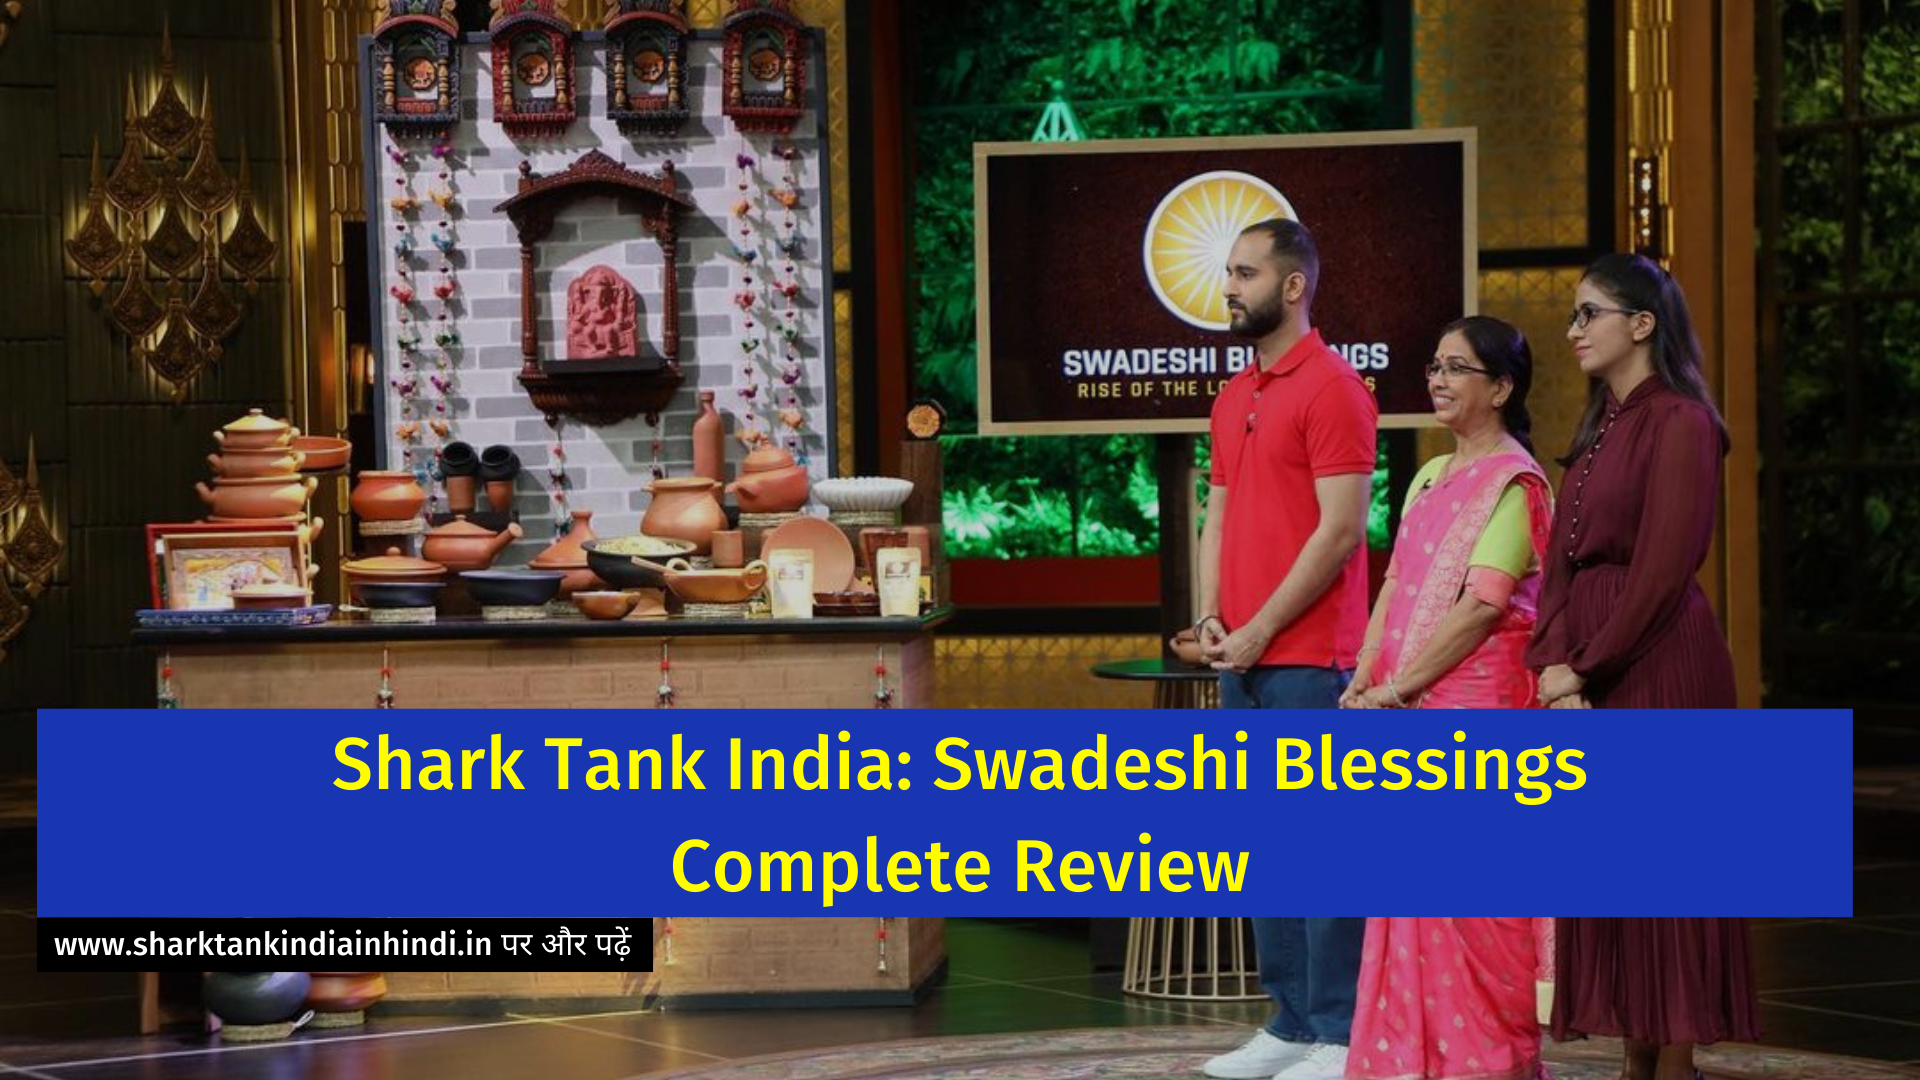 Shark Tank India: Swadeshi Blessings Complete Review